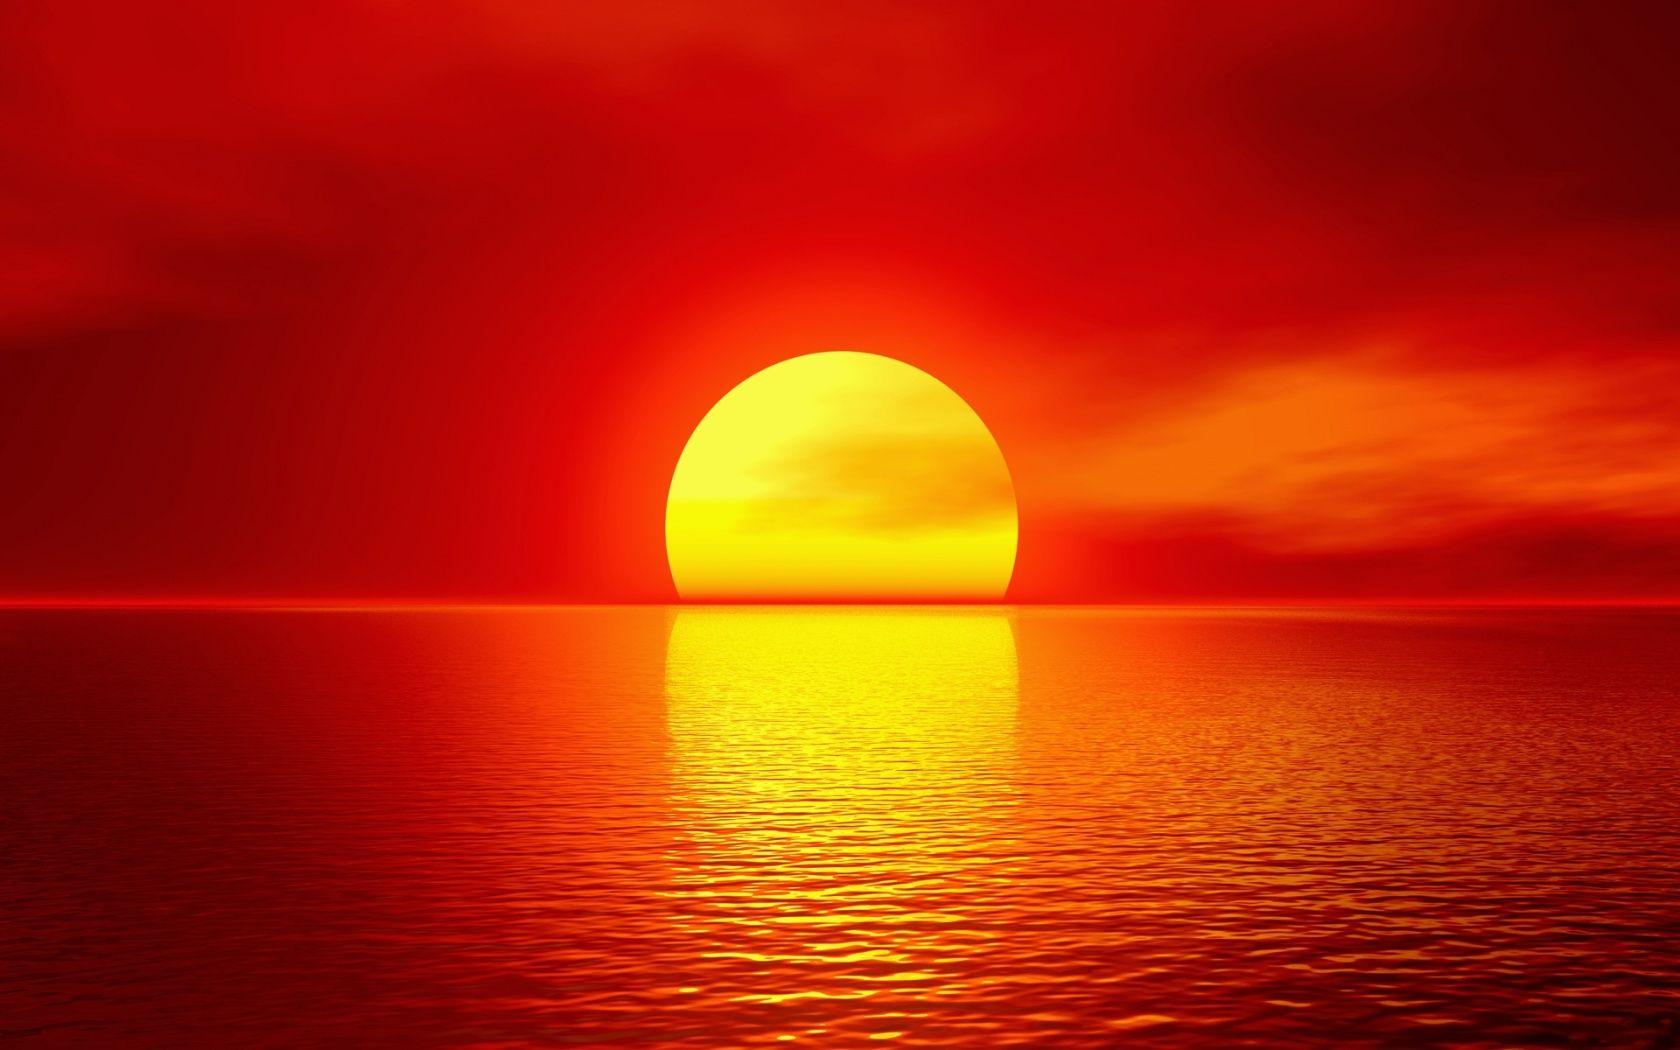 Sun Imagex1050 beauty of red sun Wallpaper and stock image. Sunset picture, Sunset wallpaper, Ocean sunset